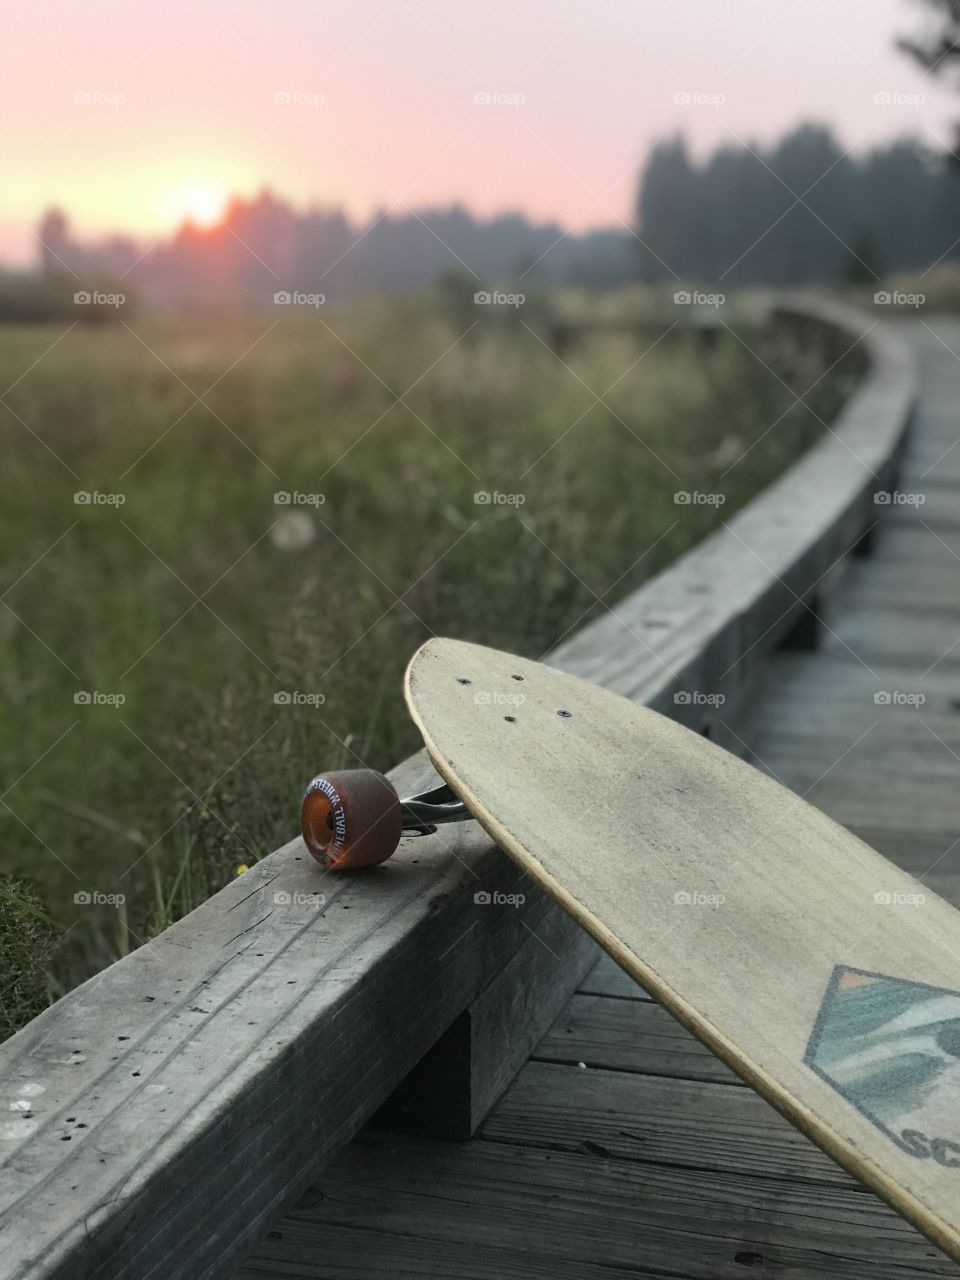 Hanging up the skateboard to stop and view the red sun set behind the tree line. 